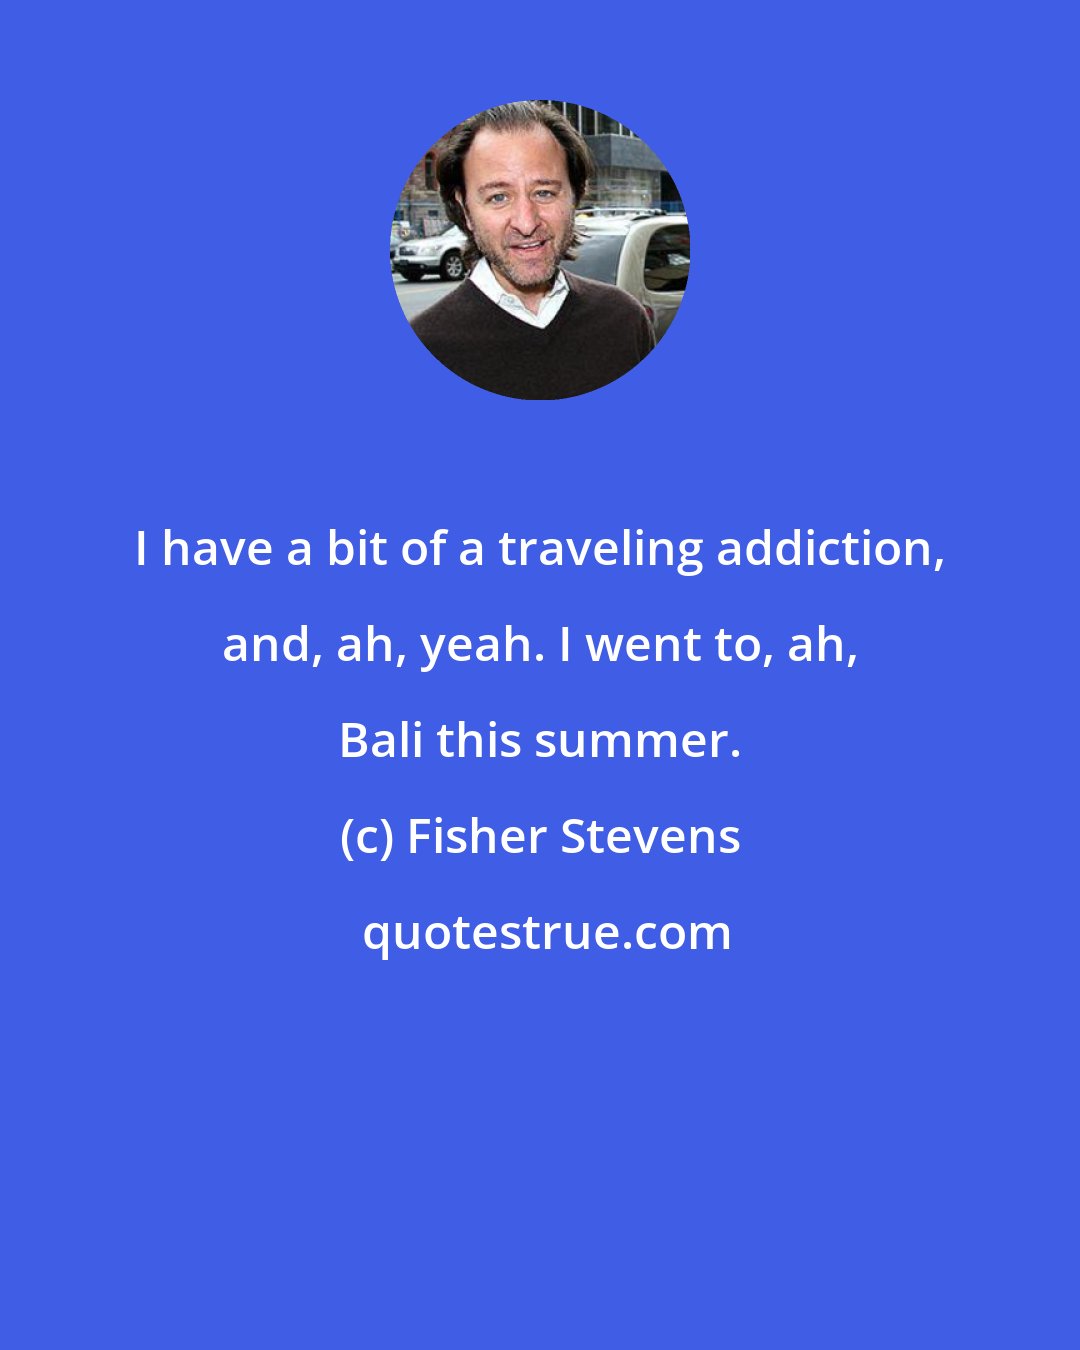 Fisher Stevens: I have a bit of a traveling addiction, and, ah, yeah. I went to, ah, Bali this summer.